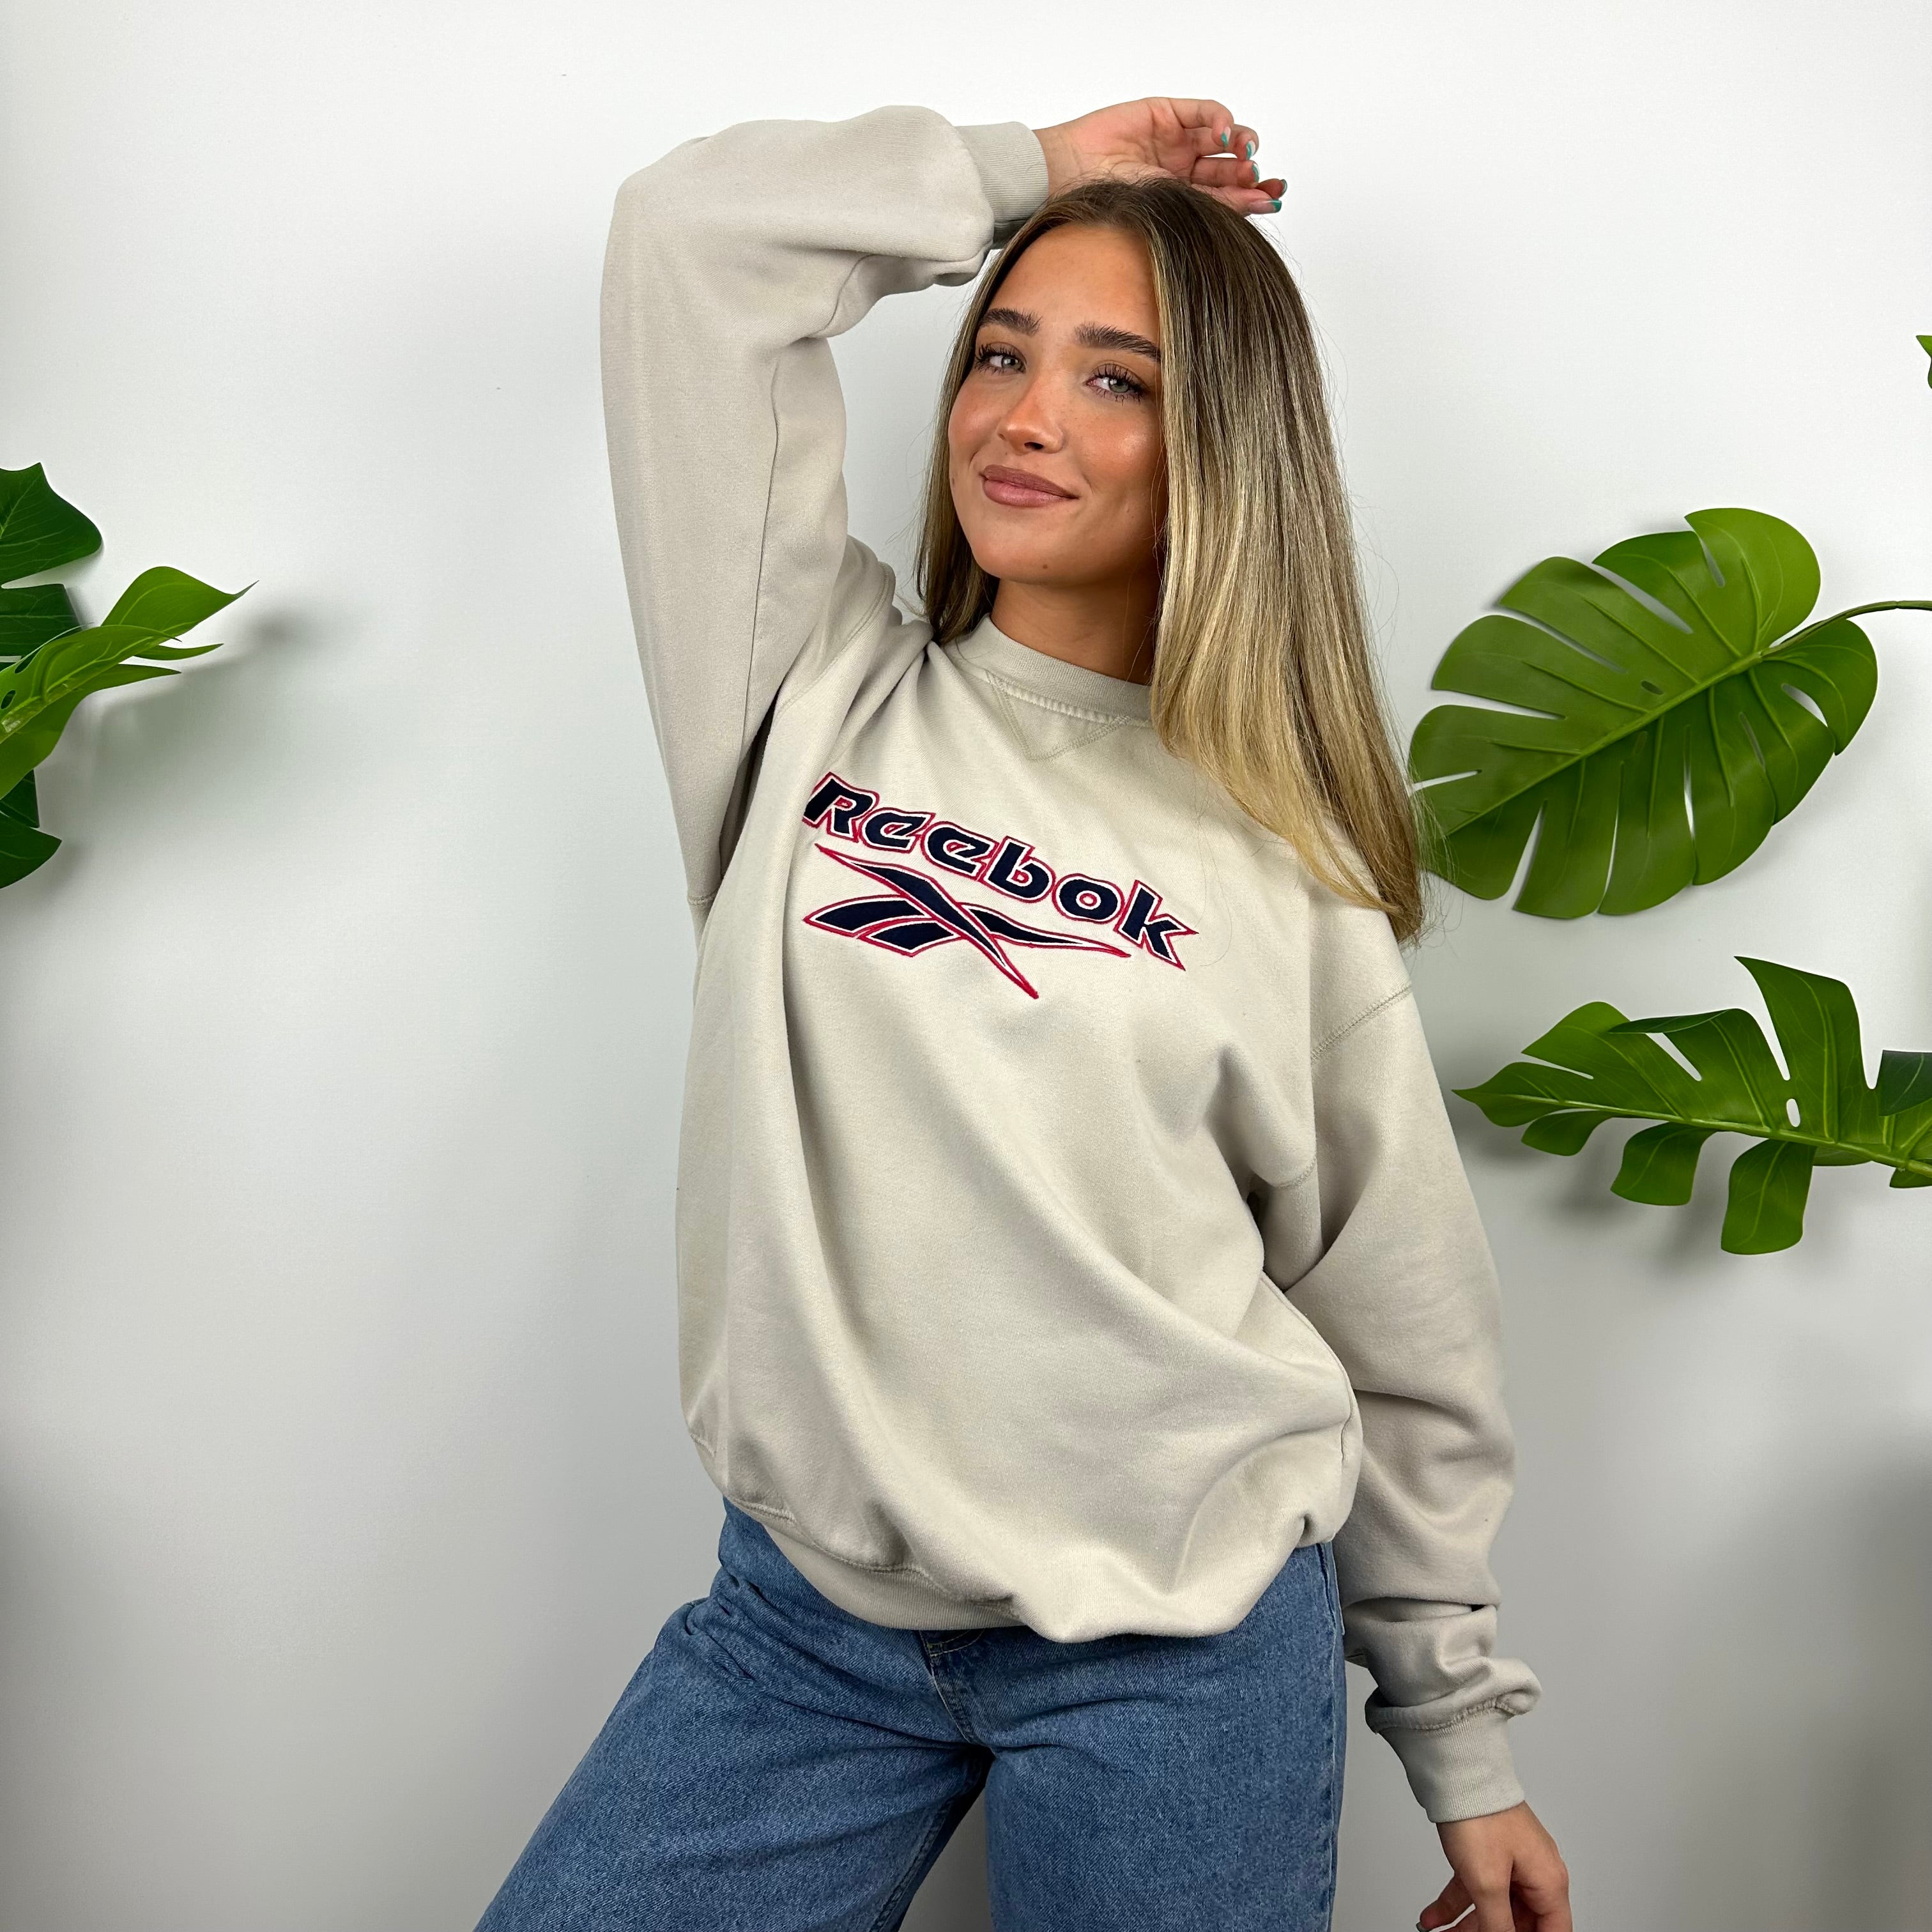 Reebok Cream Embroidered Spell Out Sweatshirt (M)